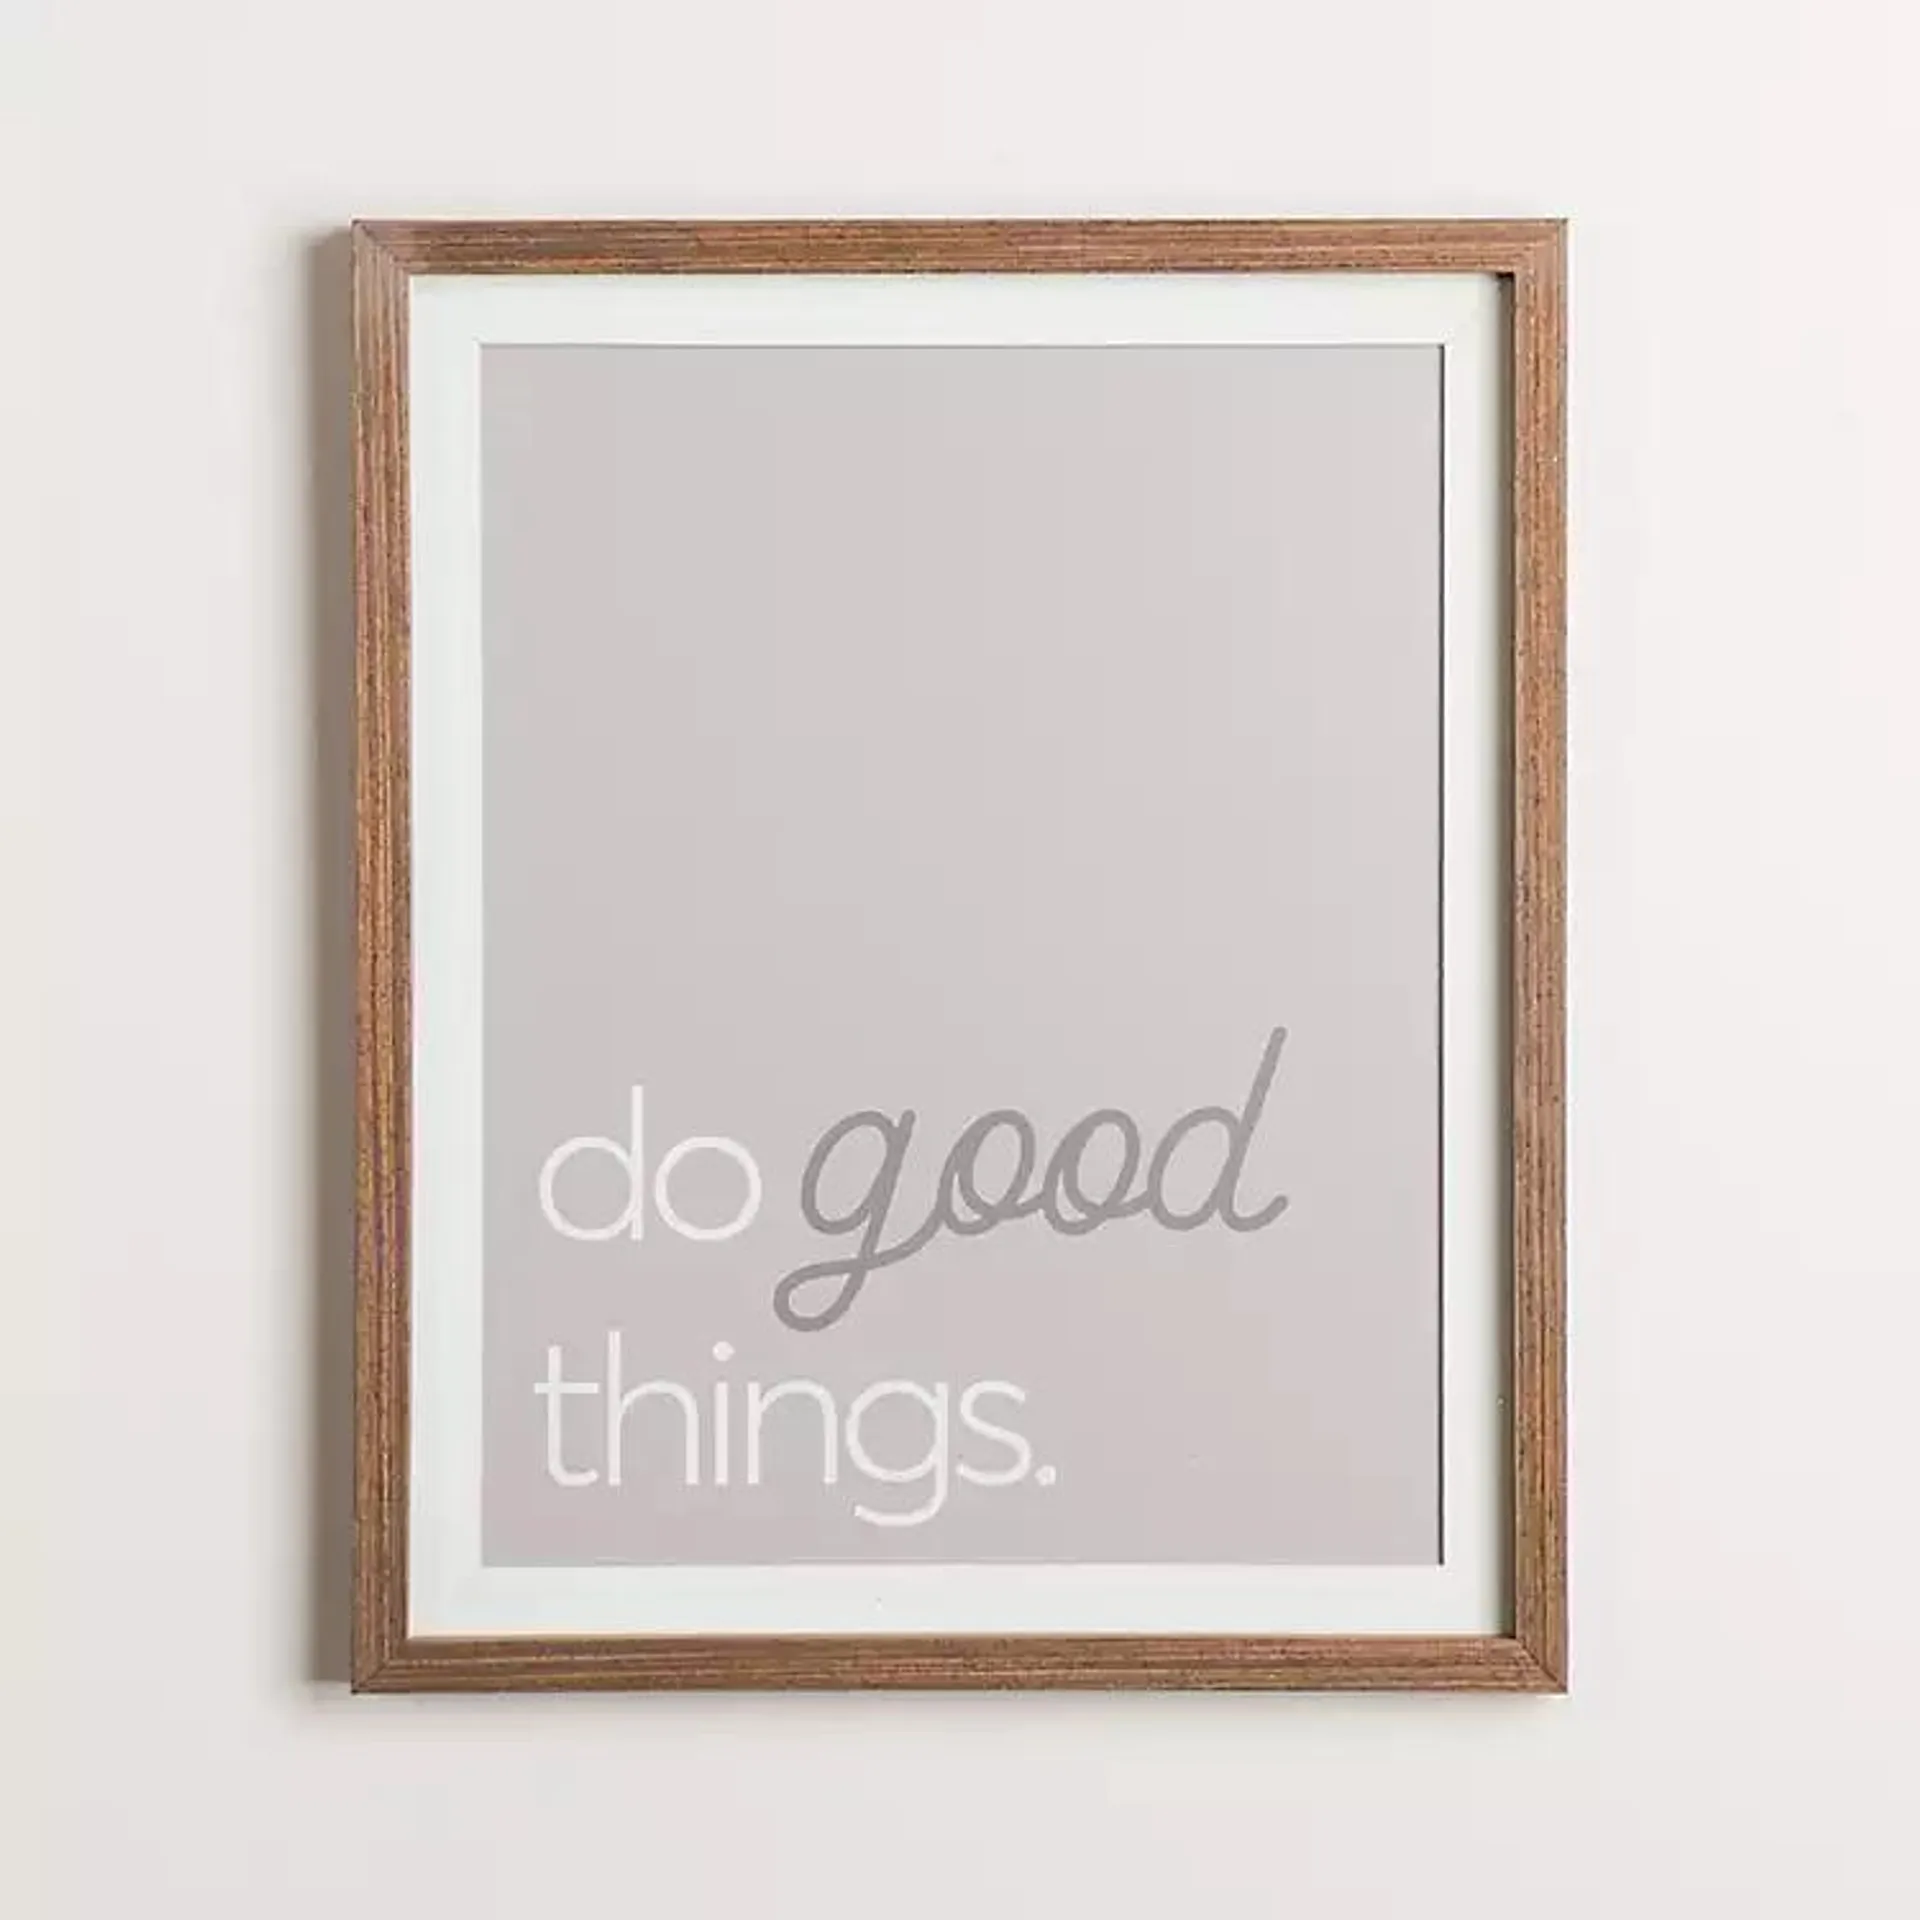 Do Good Things Framed Wall Plaque